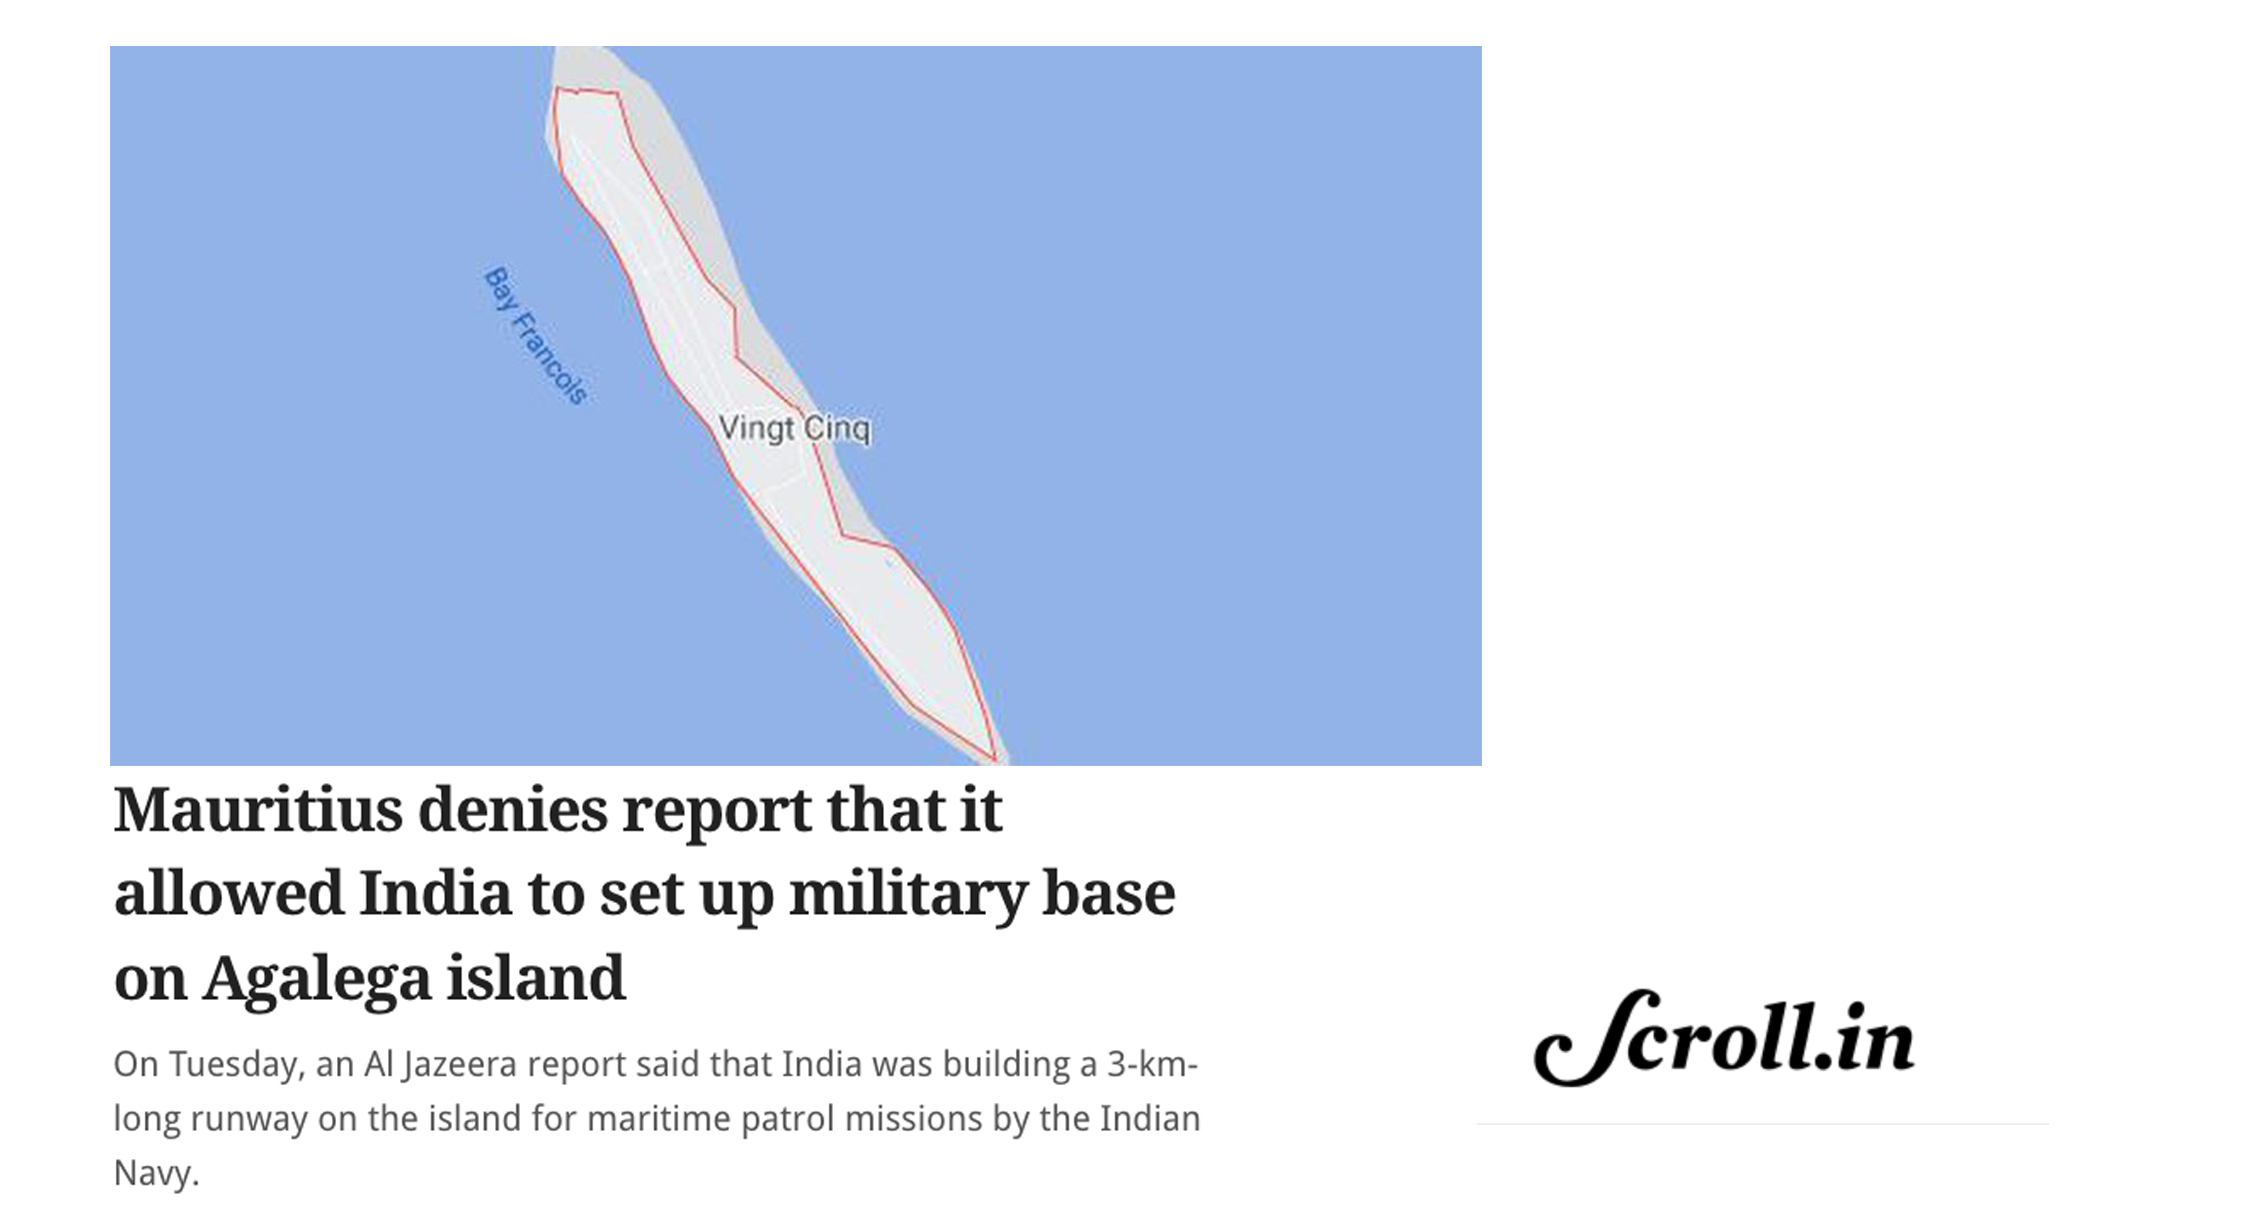 Mauritius denies report that it allowed India to set up military base on Agalega island